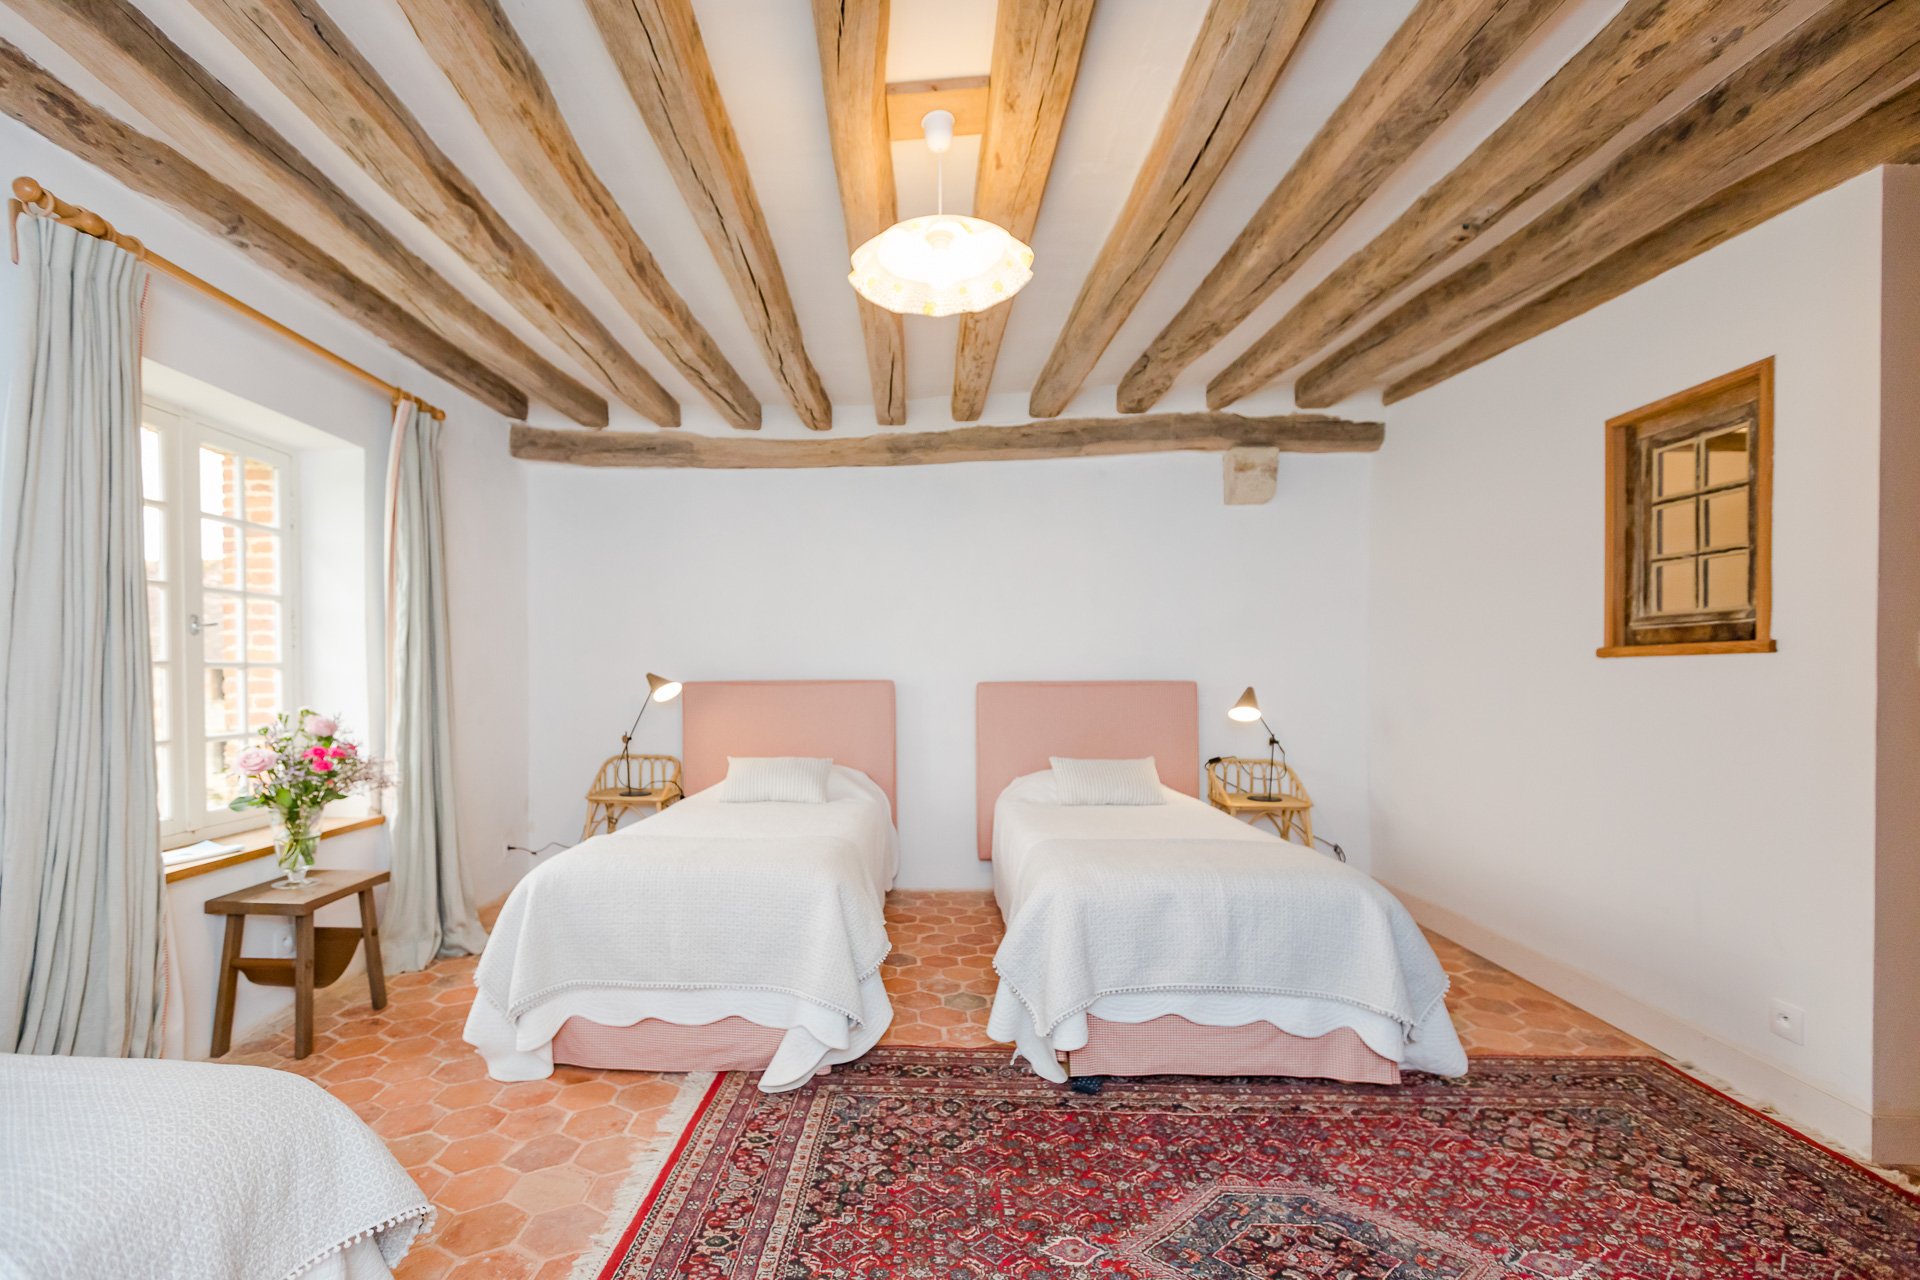 A twin bedded country bedroom with wooden beams available to rent in the farmhouse.